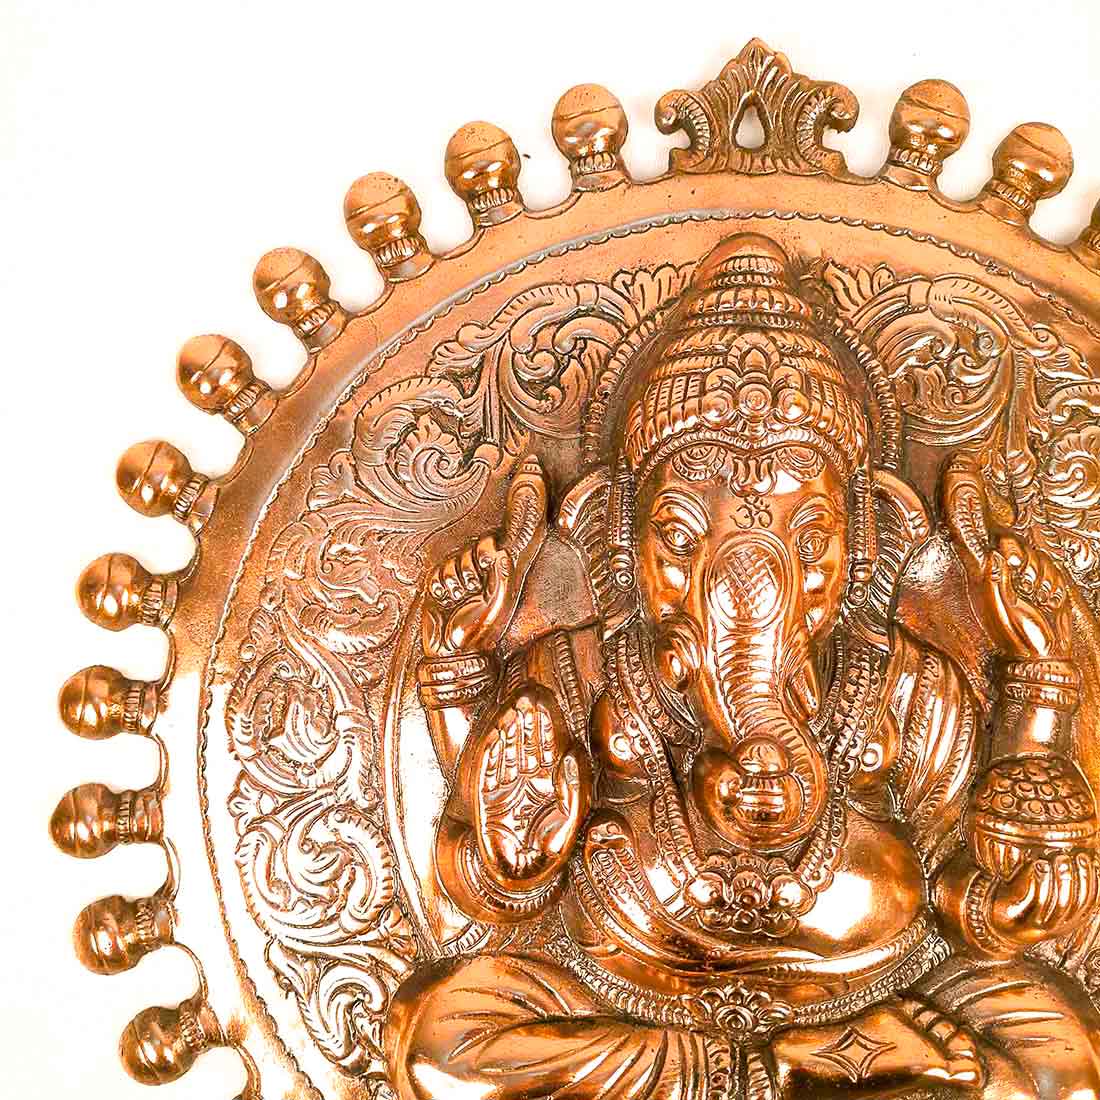 Ganesh Wall Hanging Statue | Lord Ganesha Wall Art - for Home, Puja, Living Room & Office | Antique Idol for Religious & Spiritual Decor  - 16 Inch